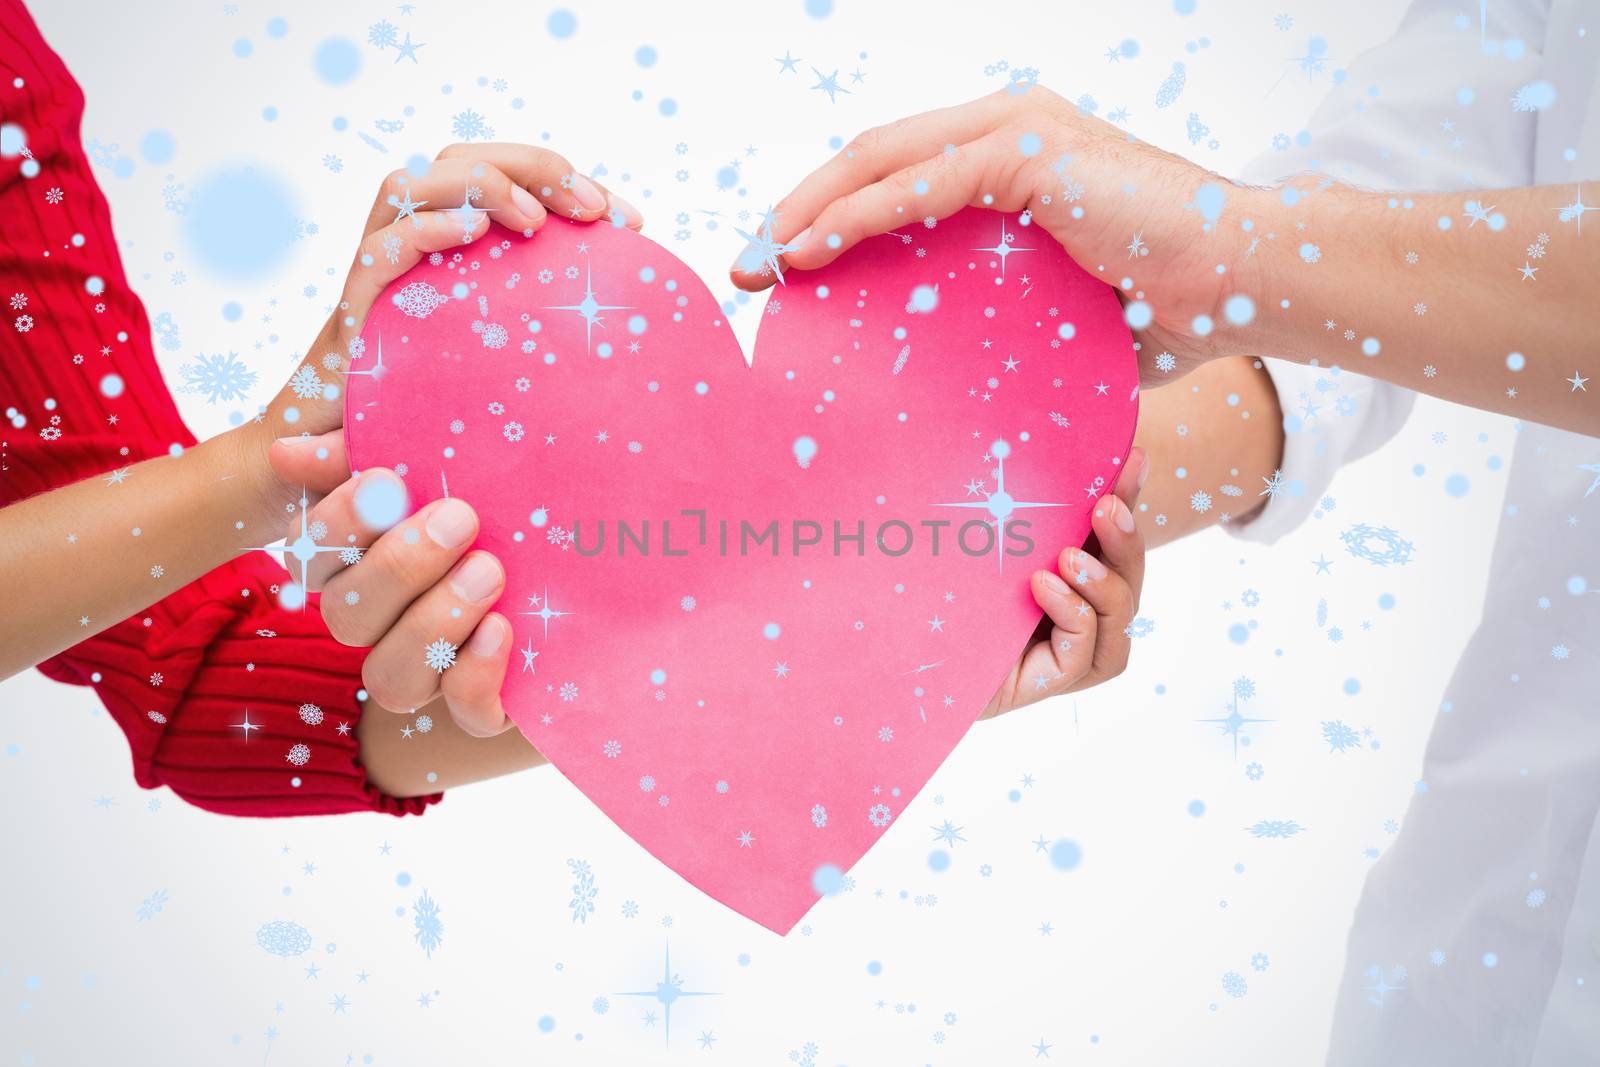 Composite image of Couples hands holding pink heart with snow falling